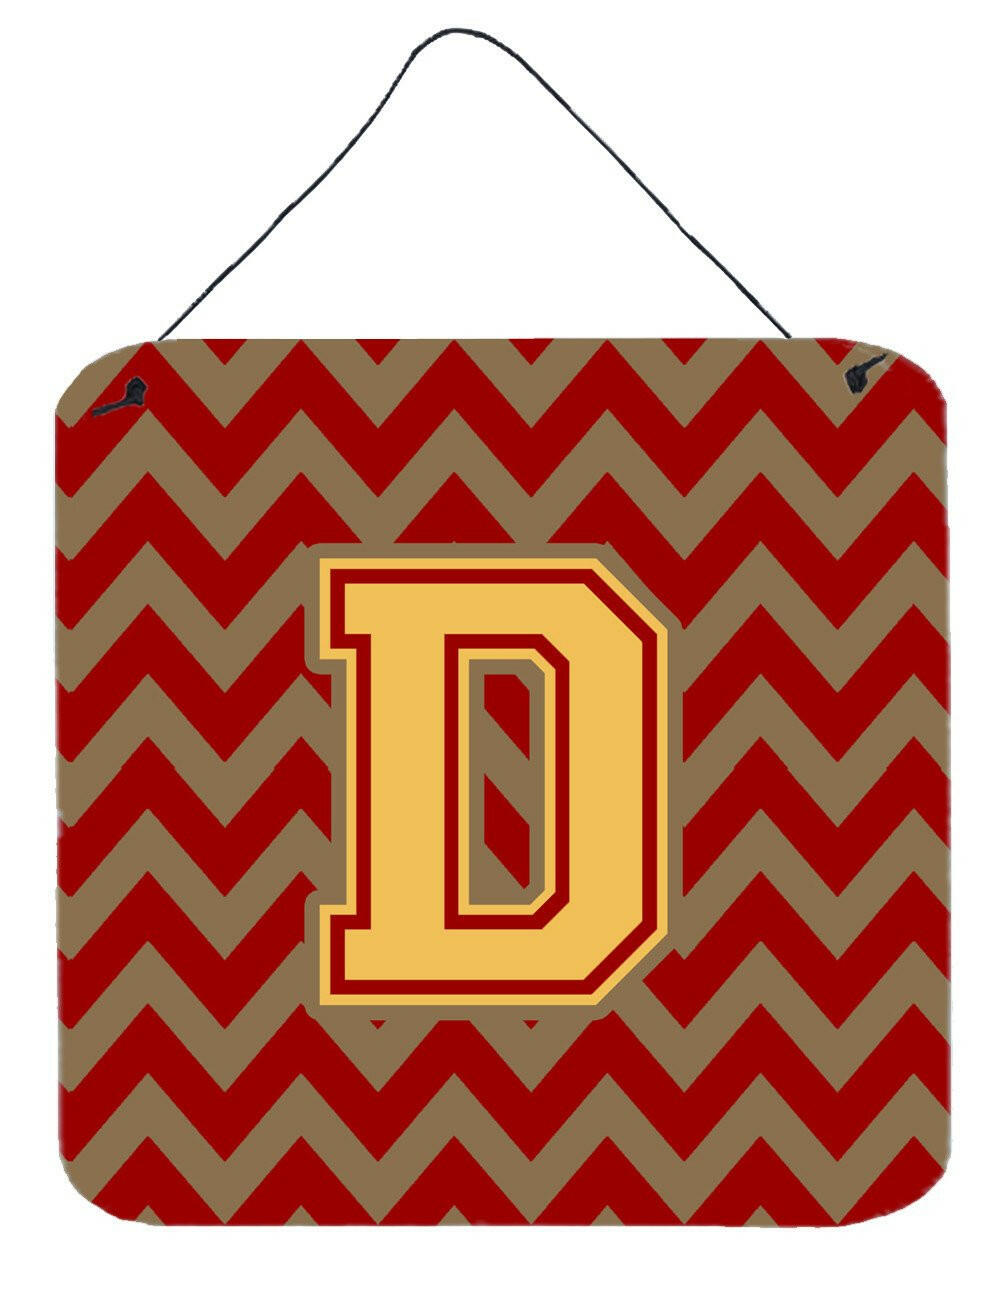 Letter D Chevron Garnet and Gold  Wall or Door Hanging Prints CJ1048-DDS66 by Caroline's Treasures